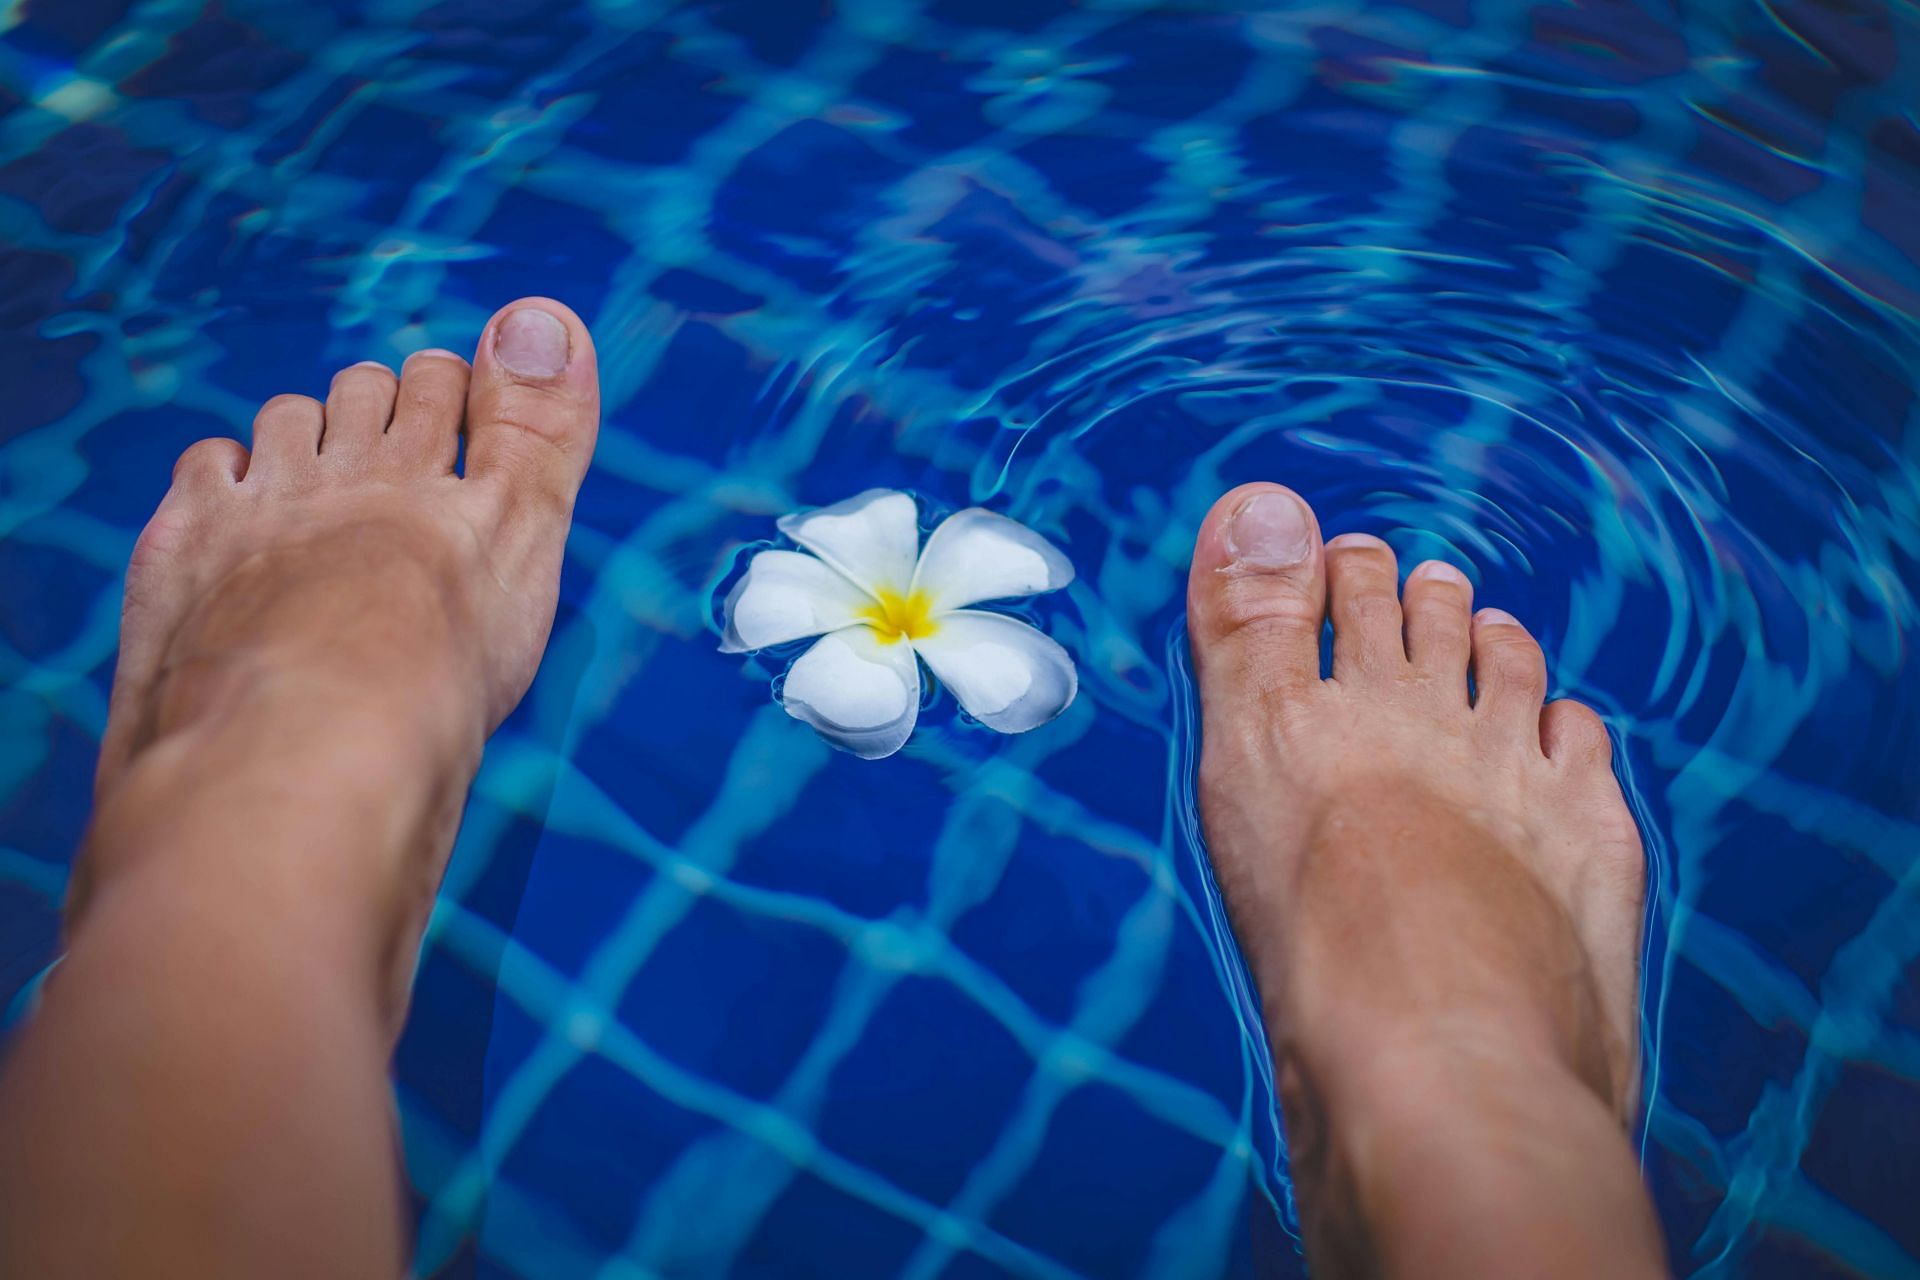 Ways to fix flat foot (image sourced via Pexels / Photo by valeria)